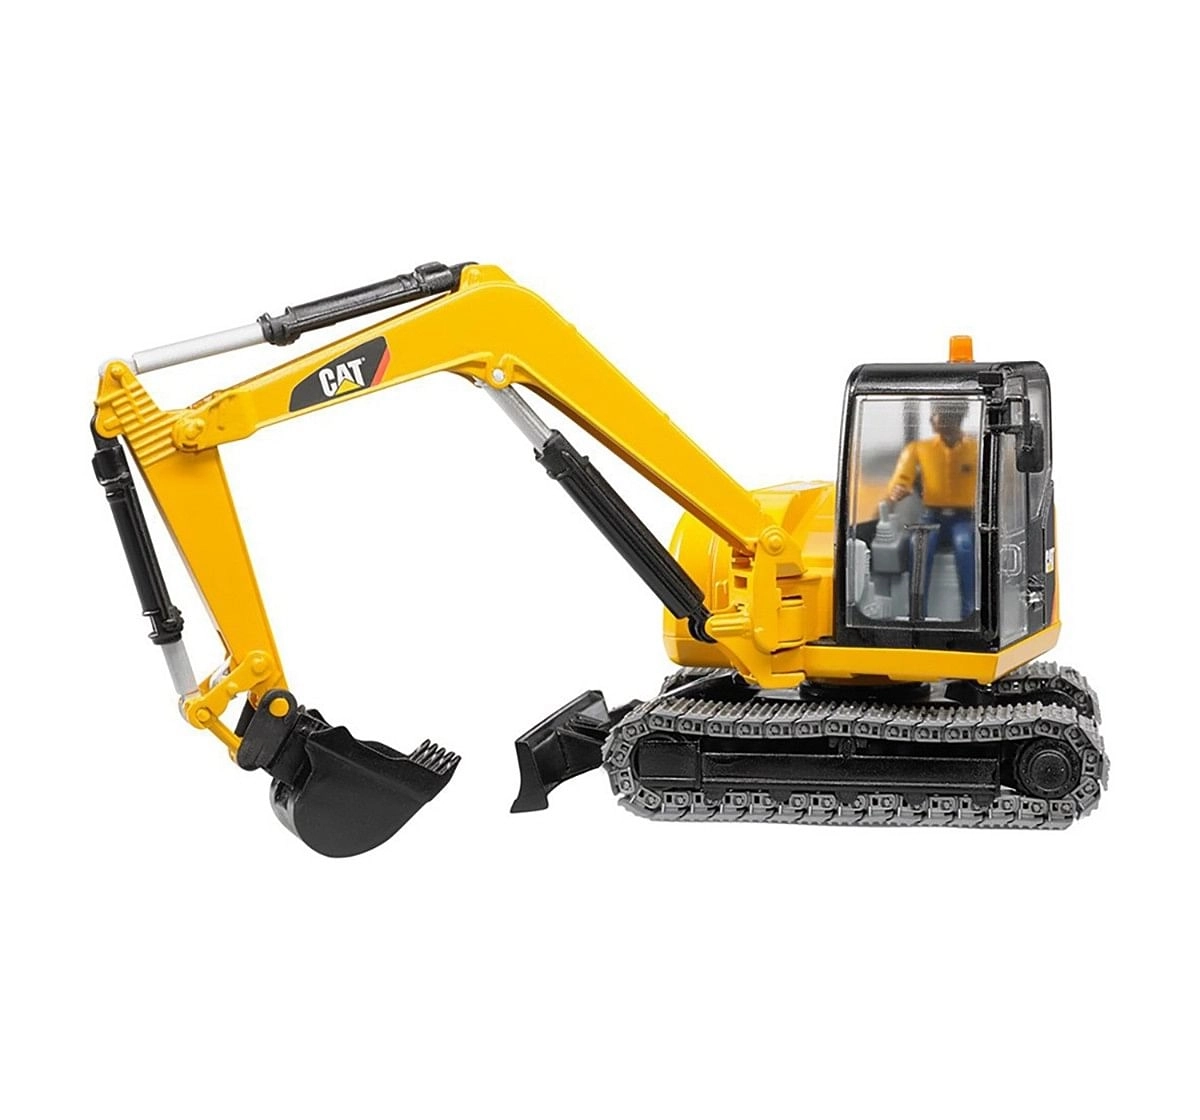 CAT Bruder 1:16 Caterpillar Mini Excavator with Worker Vehicles for Kids age 3Y+ (Yellow)